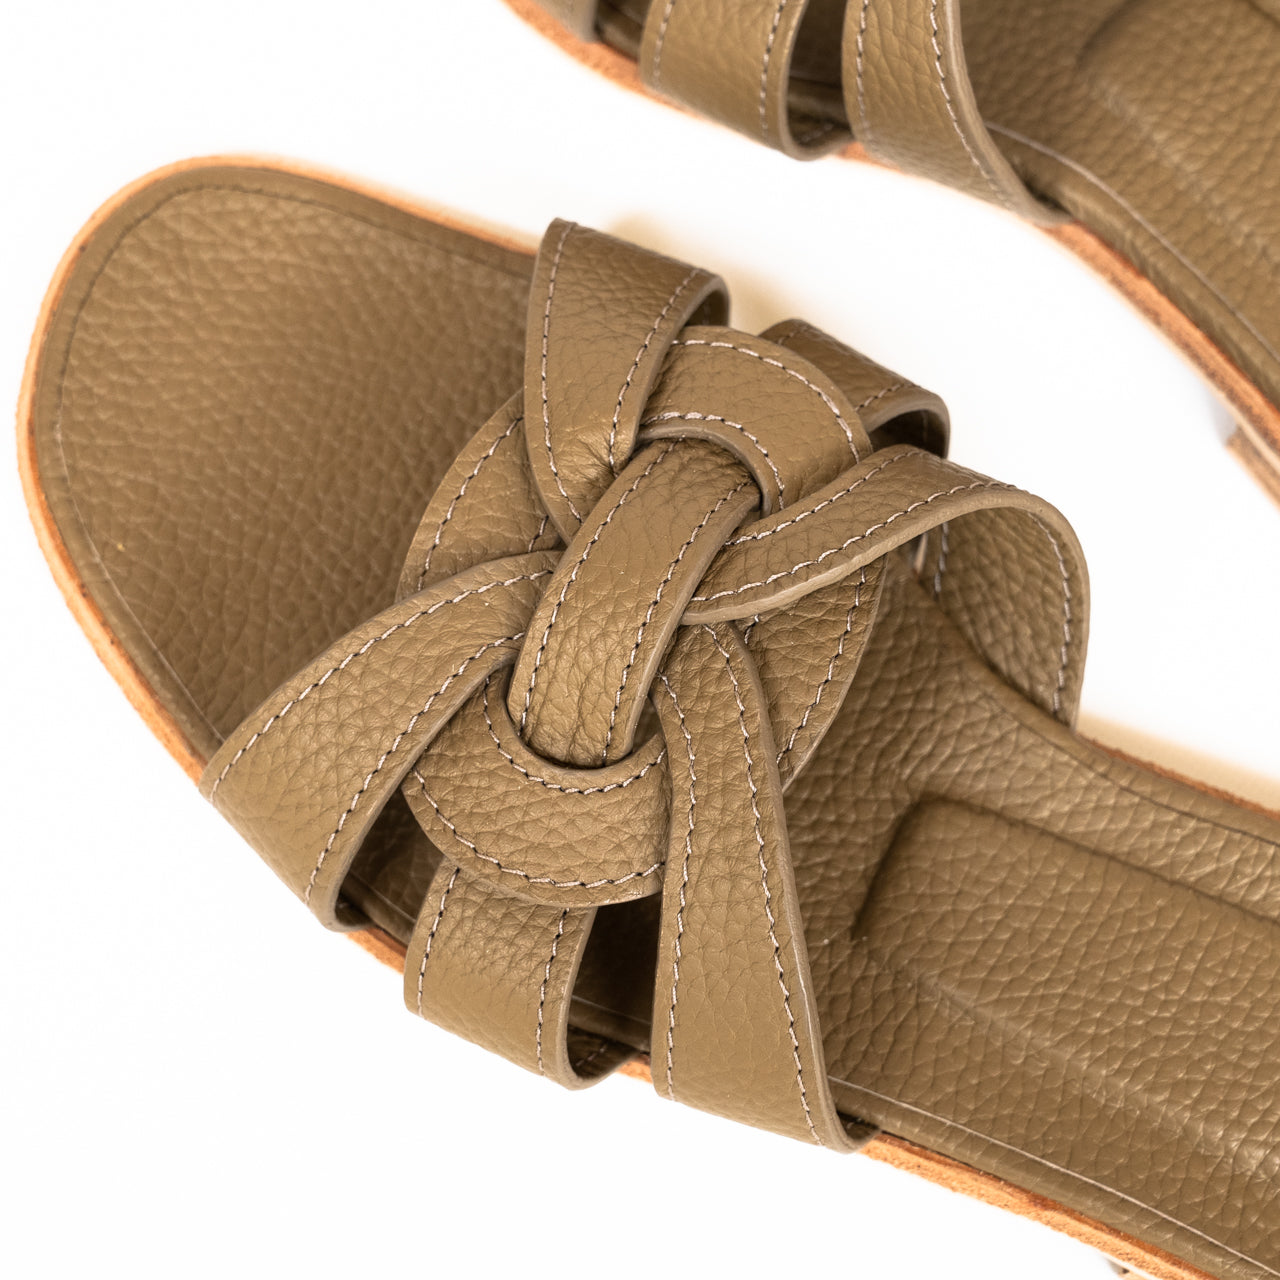 Leather flat sandals "Lupus" Cuir Mash/Taupe